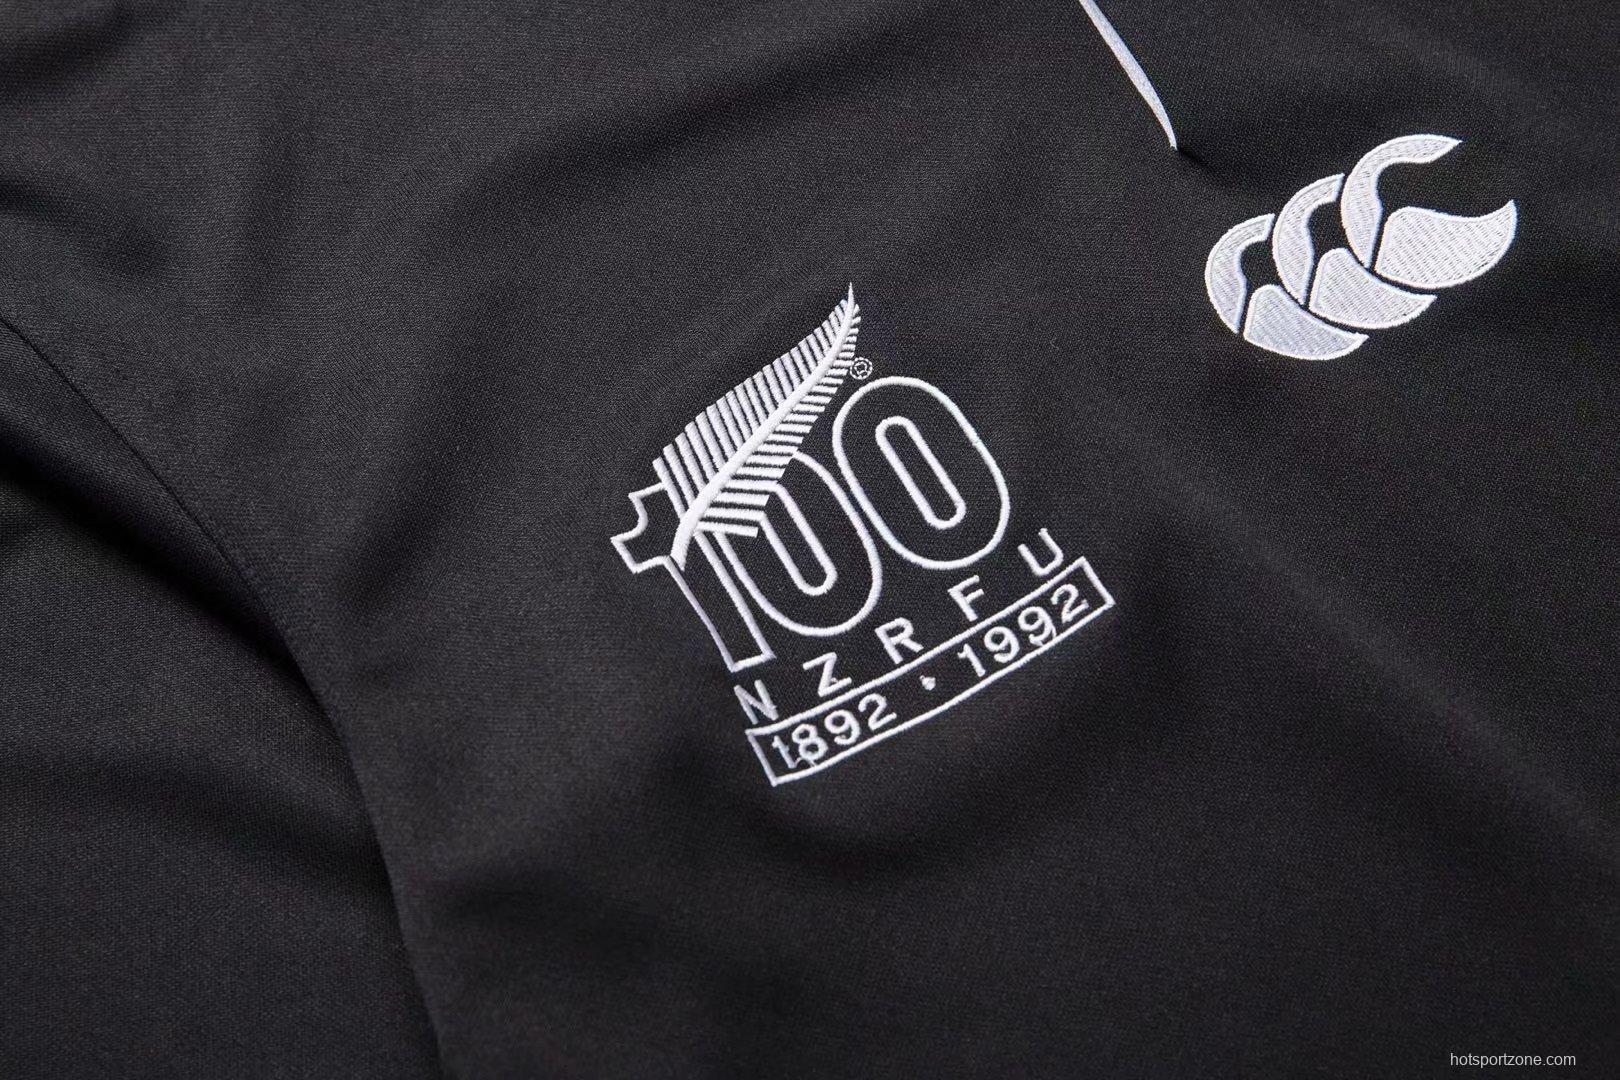 All Blacks 1992 Men's 100 Years Rugby Jersey